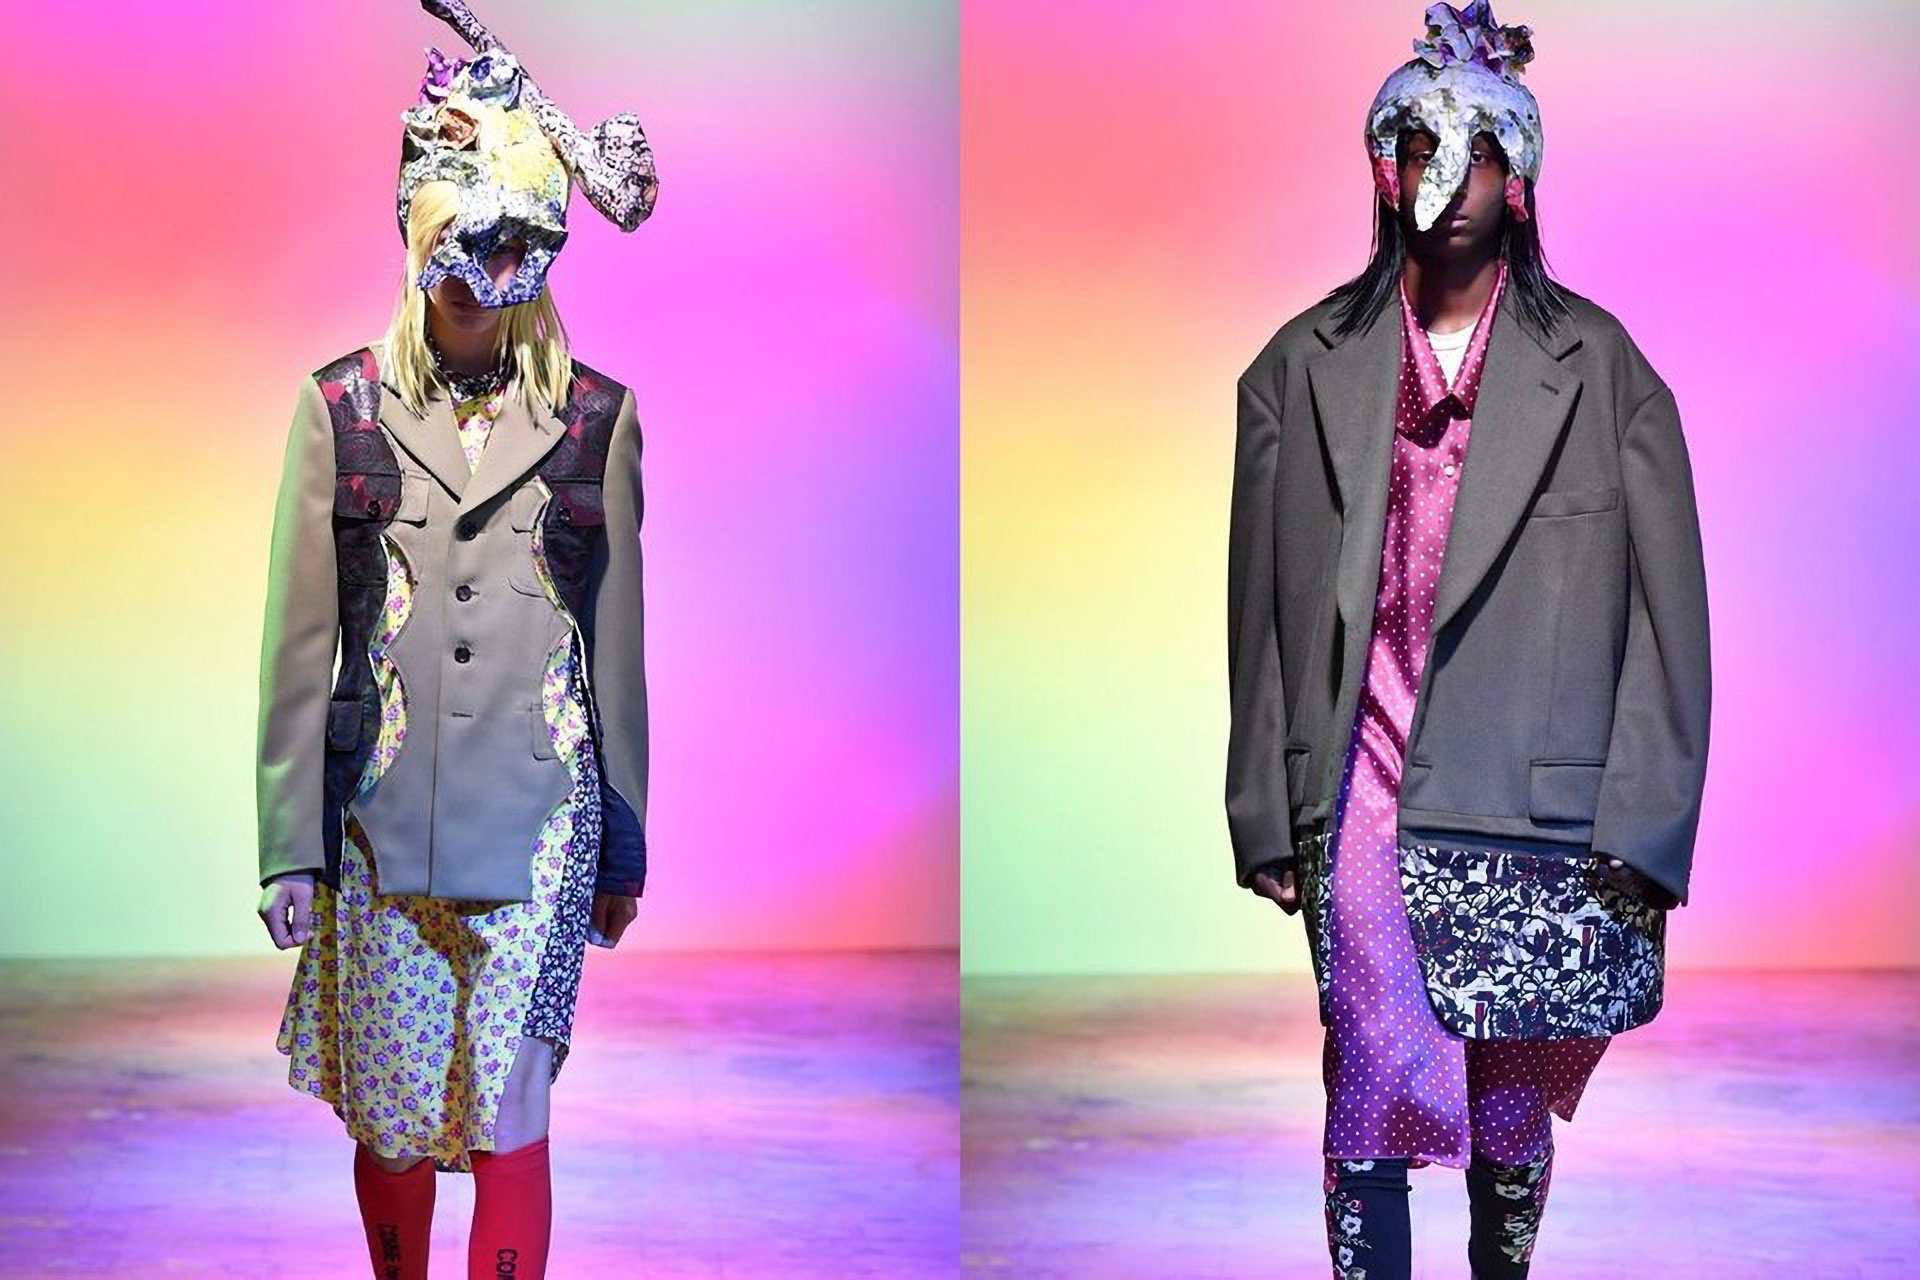 Two models wearing deconstructed suiting and sculptural head masks/hats in front of rainbow gradient backgrounds